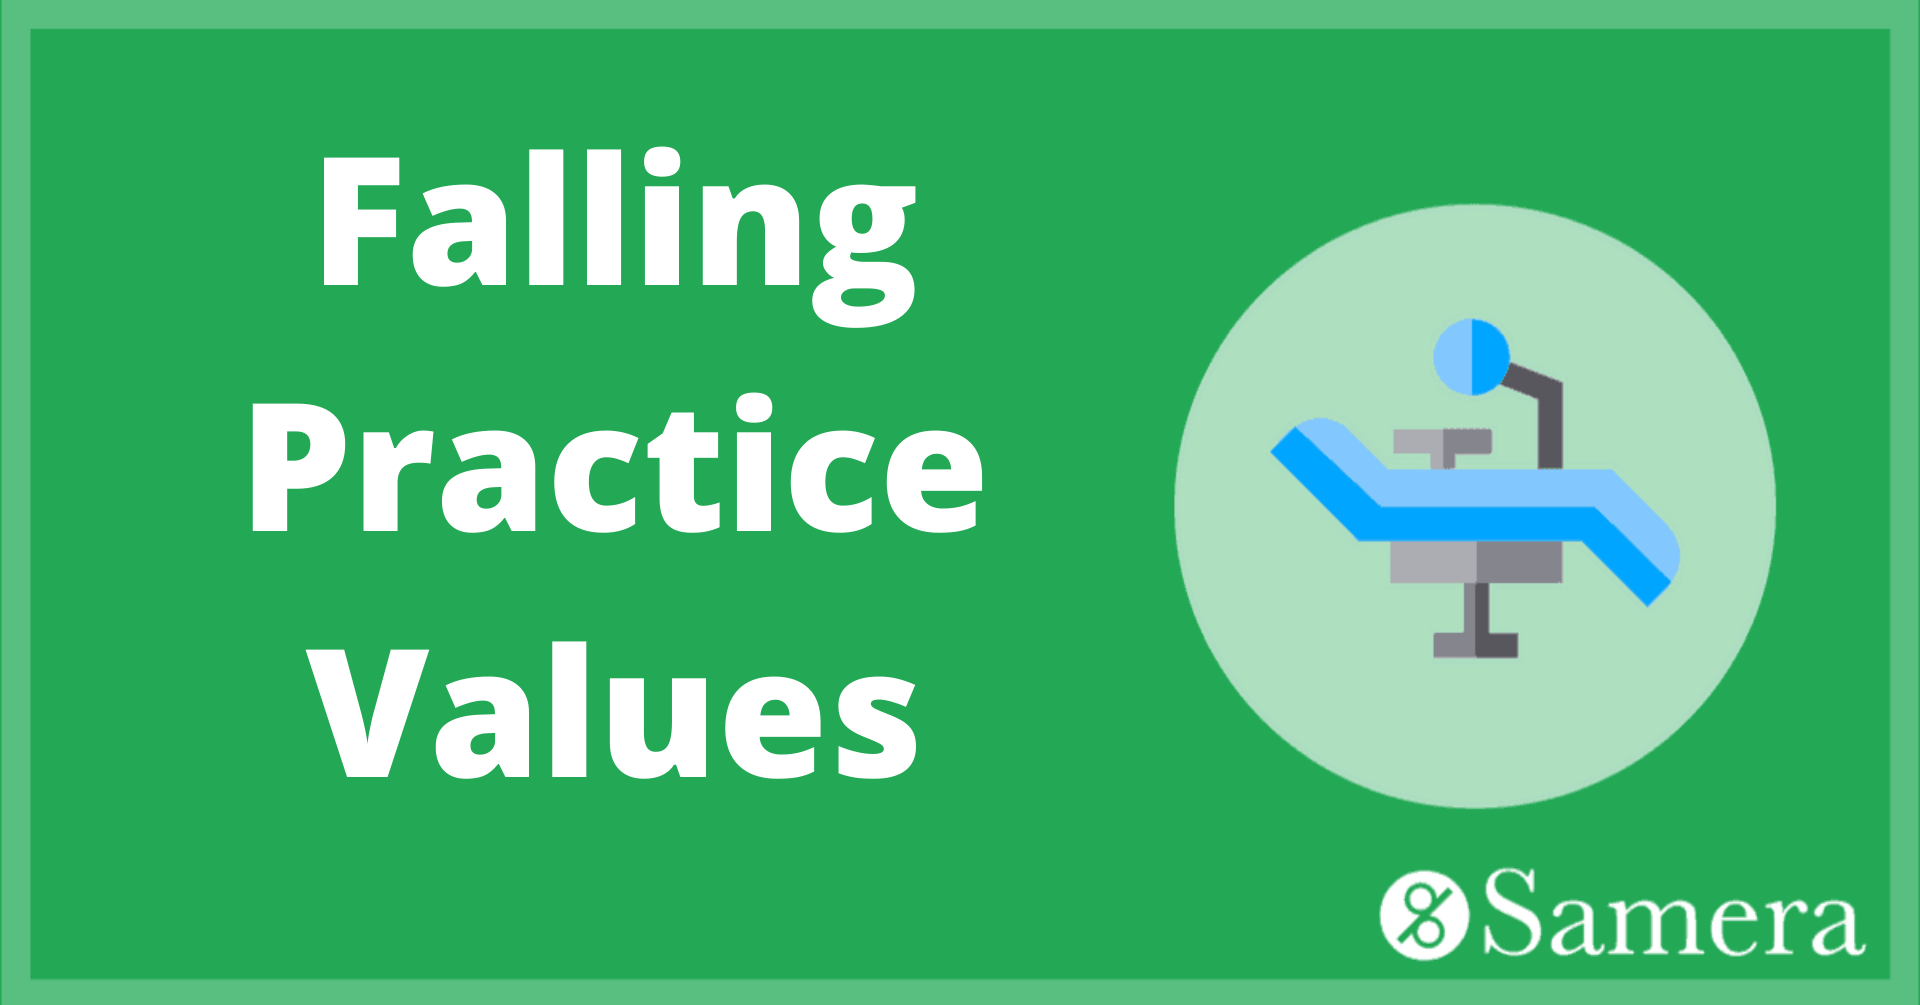 Falling Practice Values 2017/8